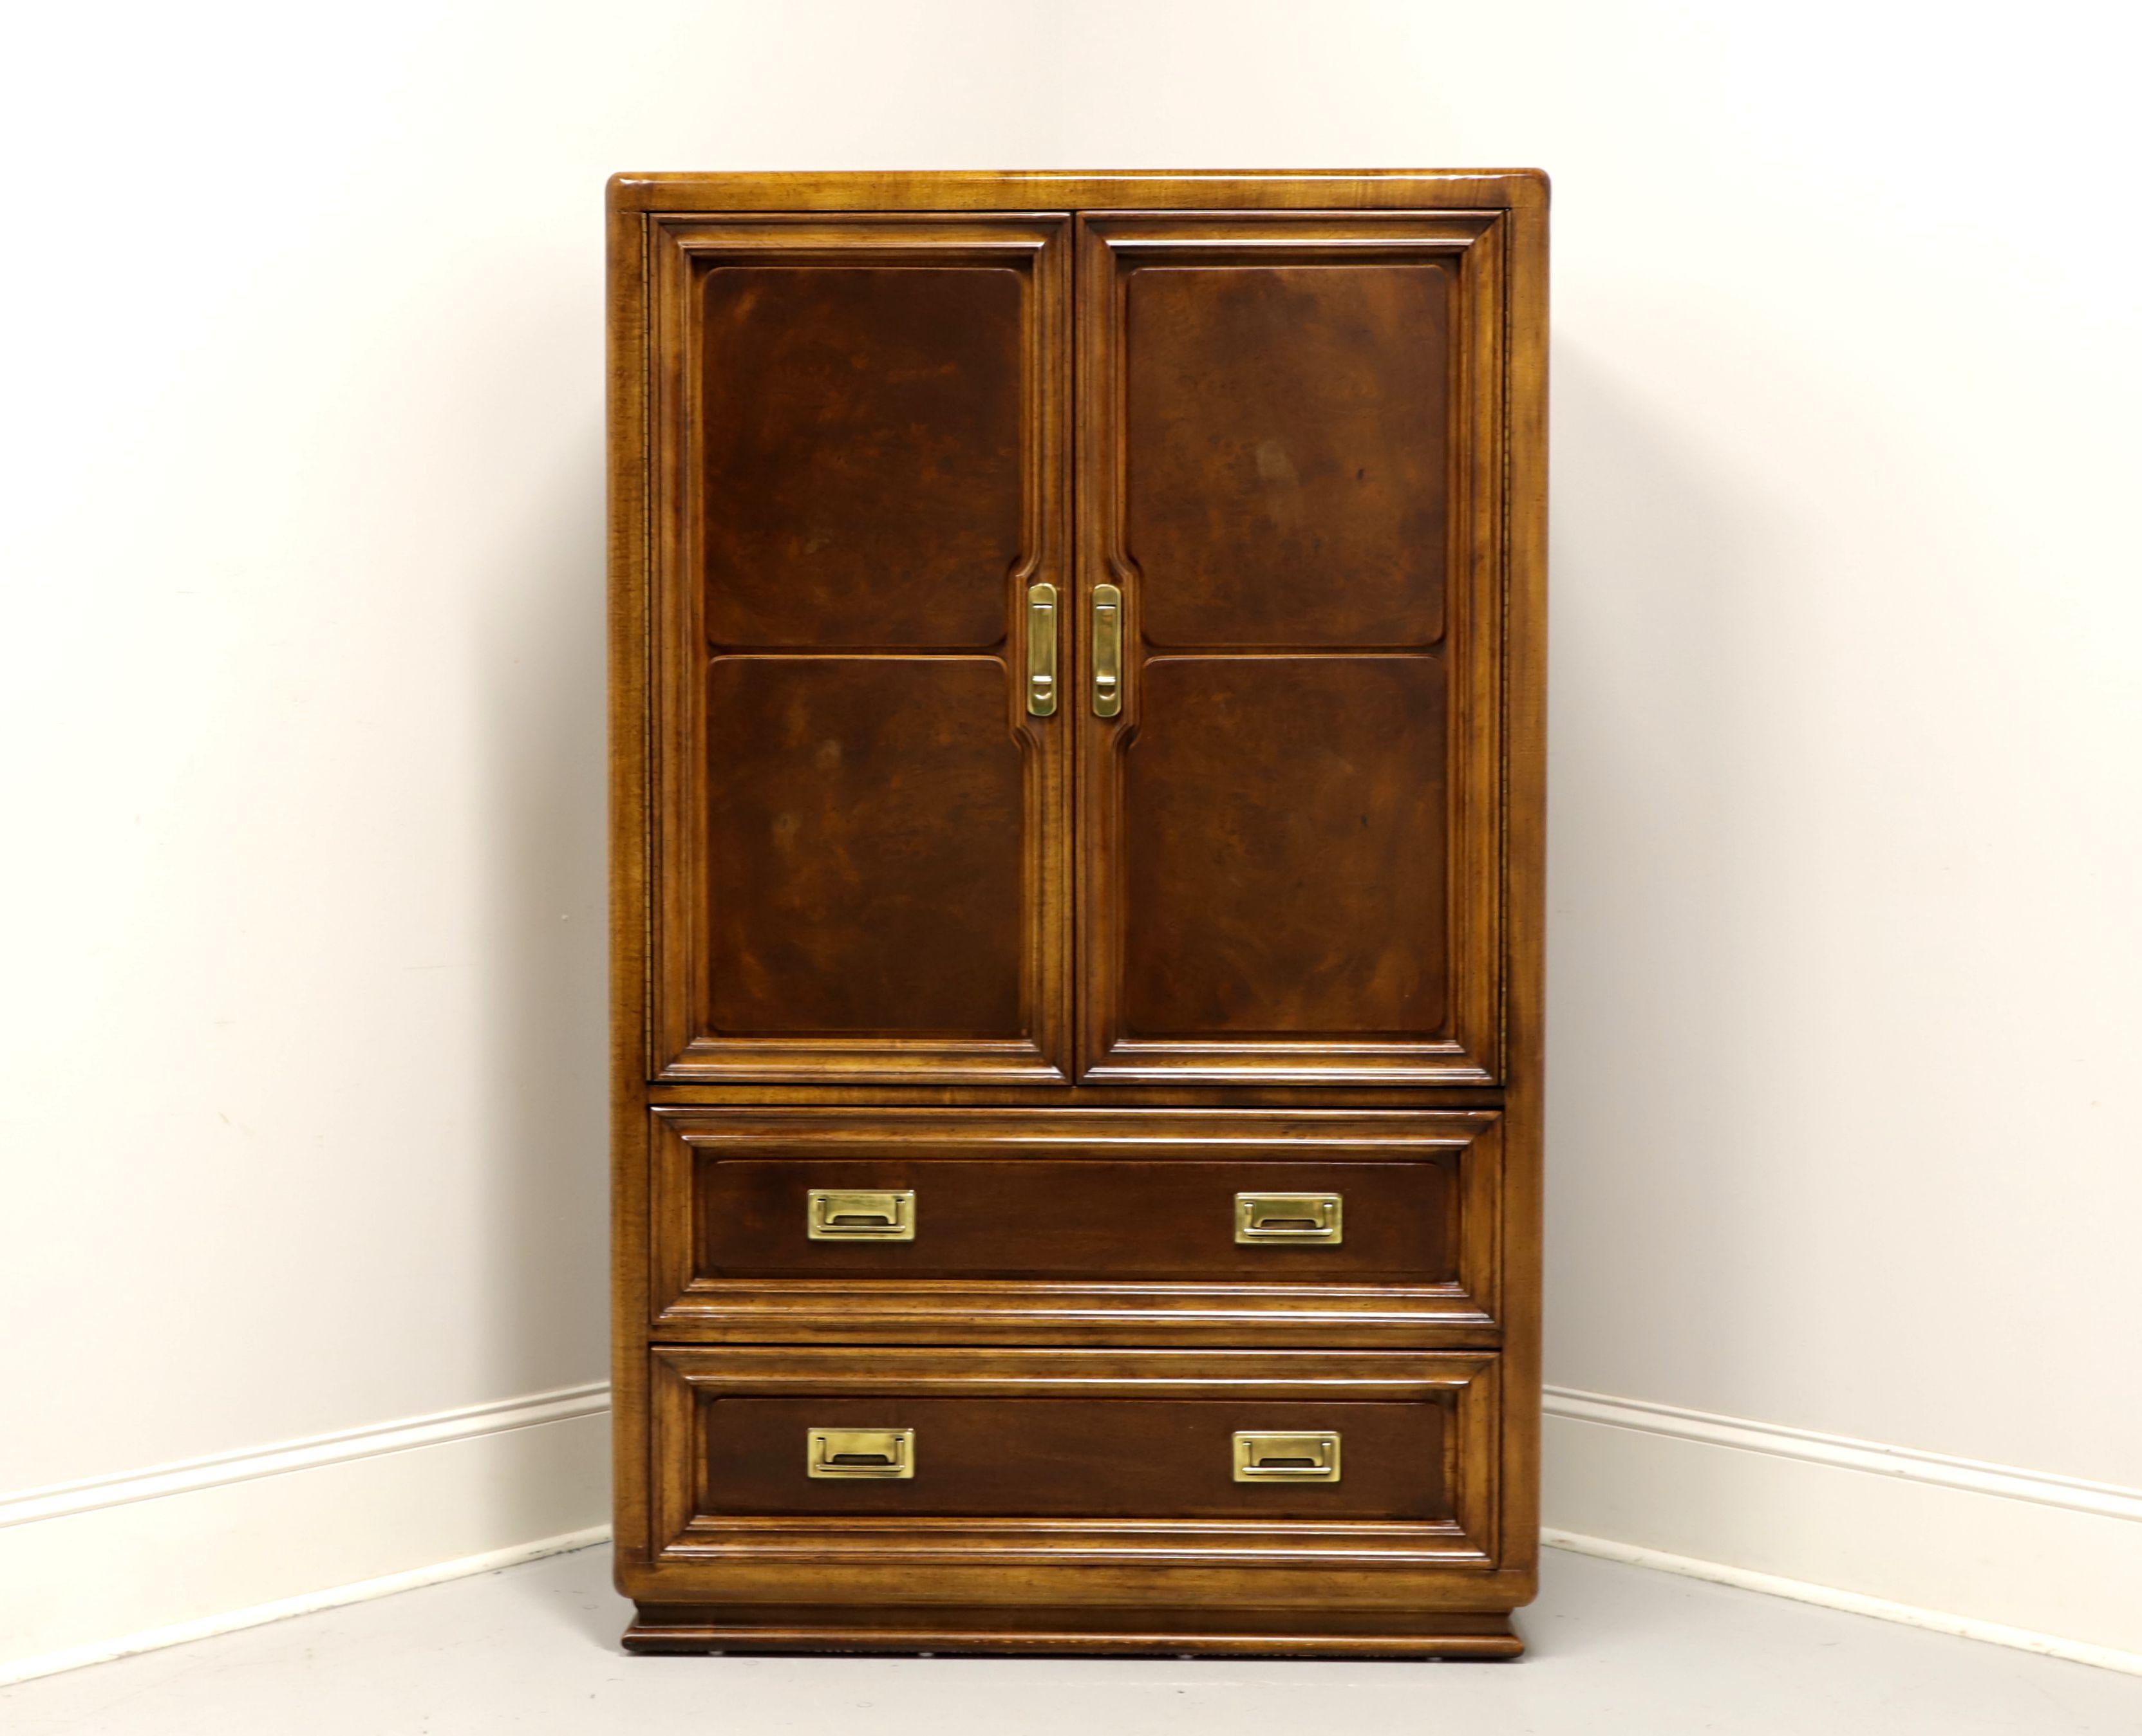 An Asian style gentleman's chest by Unique Furniture. Nutwood with slightly distressed finish, burlwood to door & drawer fronts, and brass hardware. Upper cabinet features double doors revealing a fixed top shelf, two upper cubbies, three middle